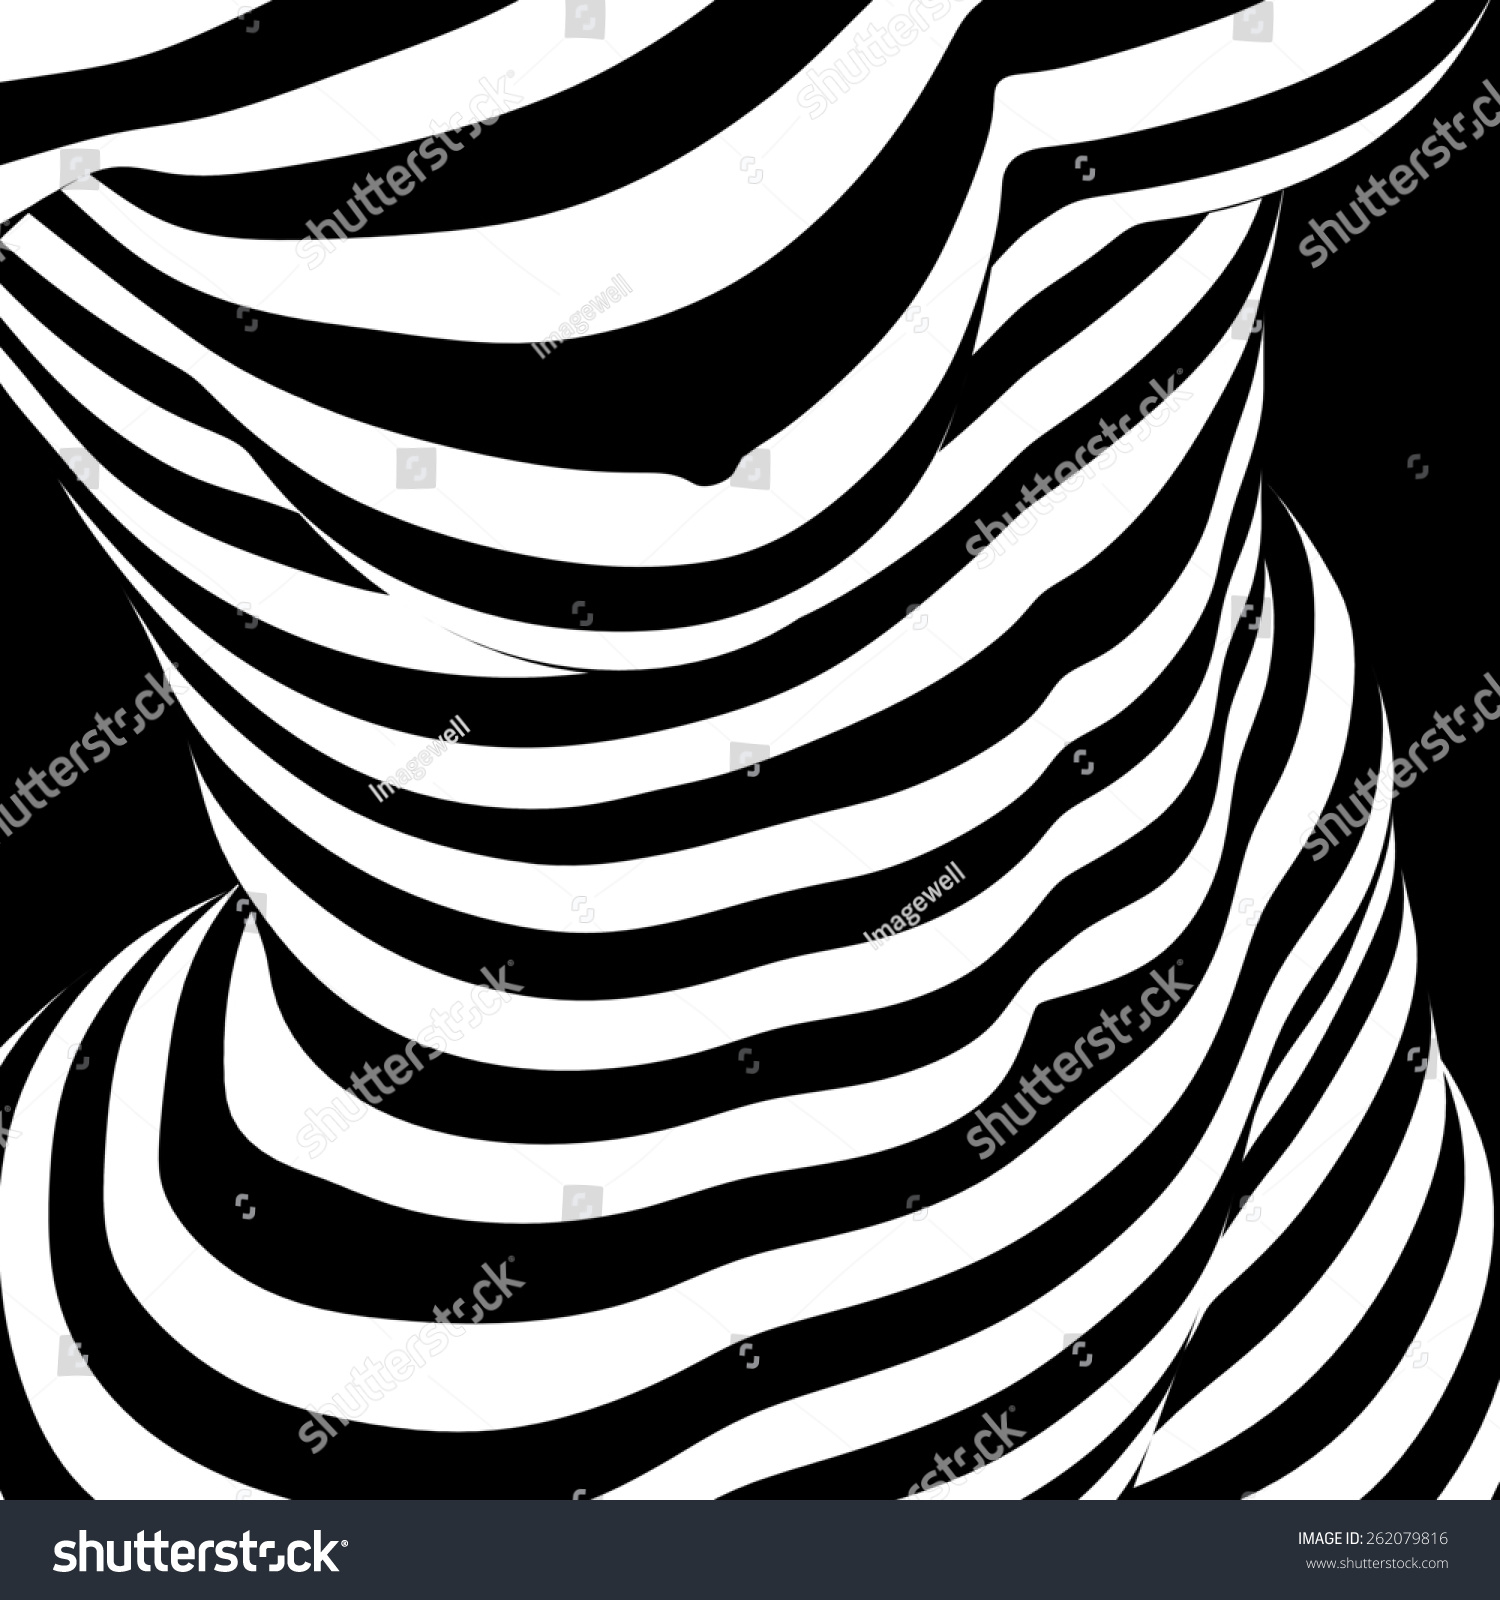 Abstract Female Nude Op Art Style Stock Illustration 262079816